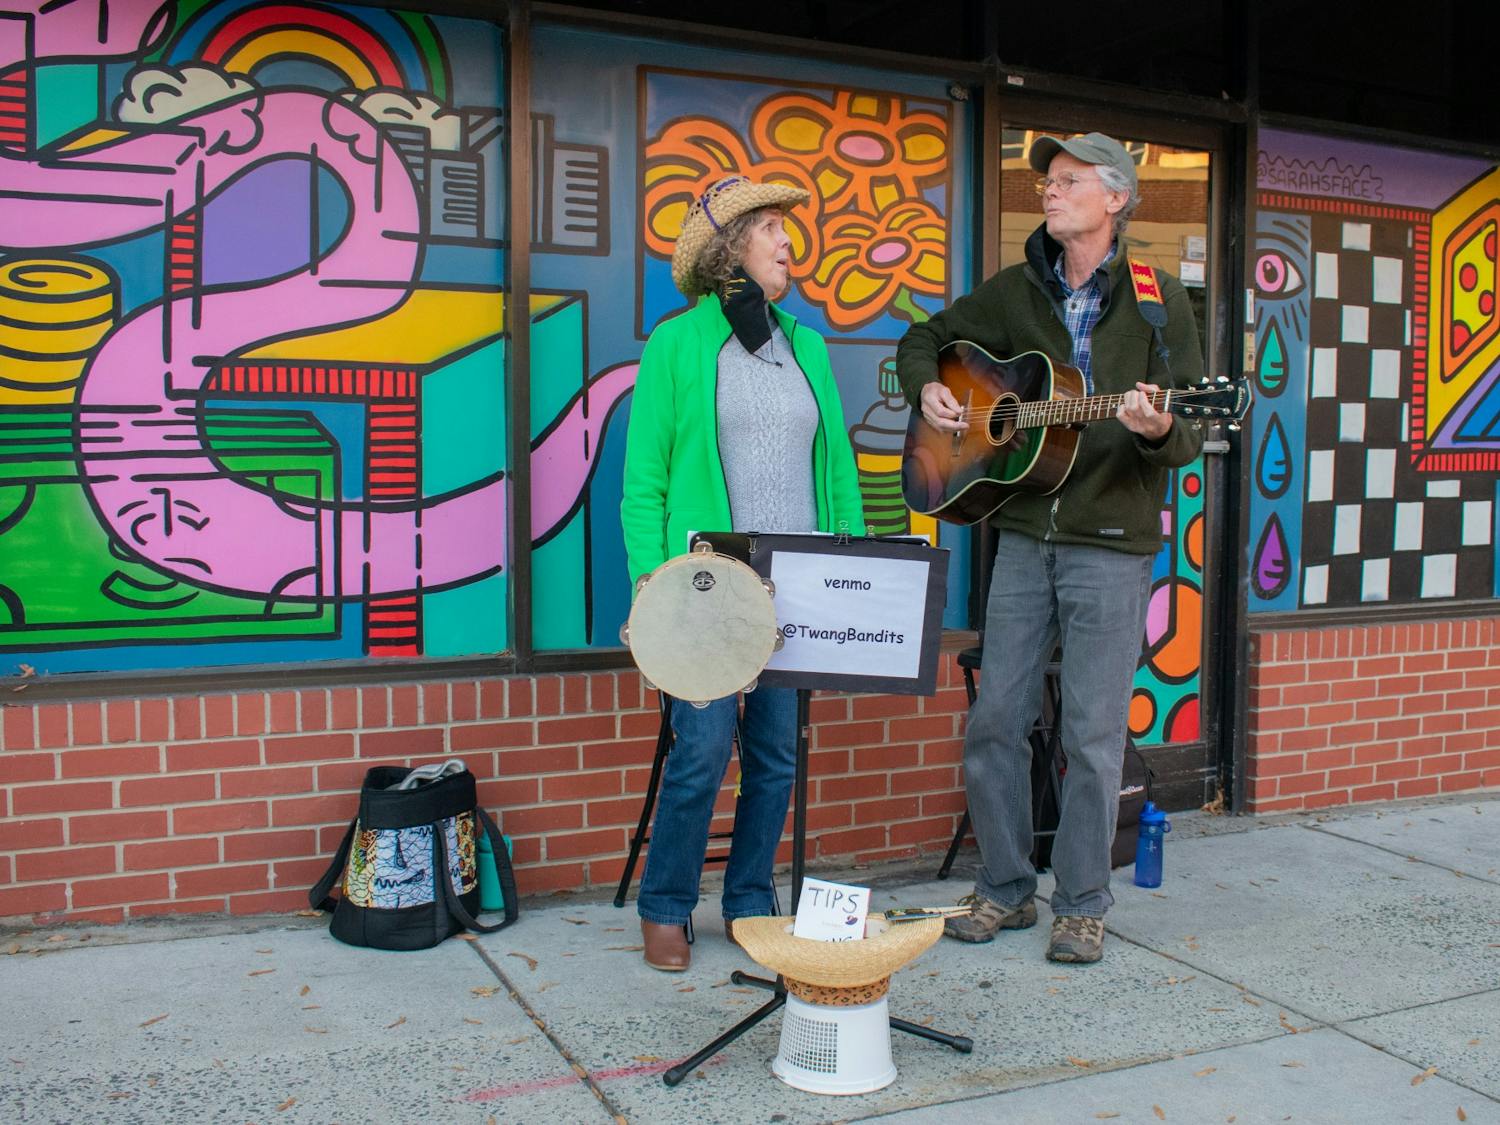 Catherine and Tony of the Twang Bandits play some classic country music on Franklin Street on Saturday, Oct. 17, 2020 for the Save The Music Series.